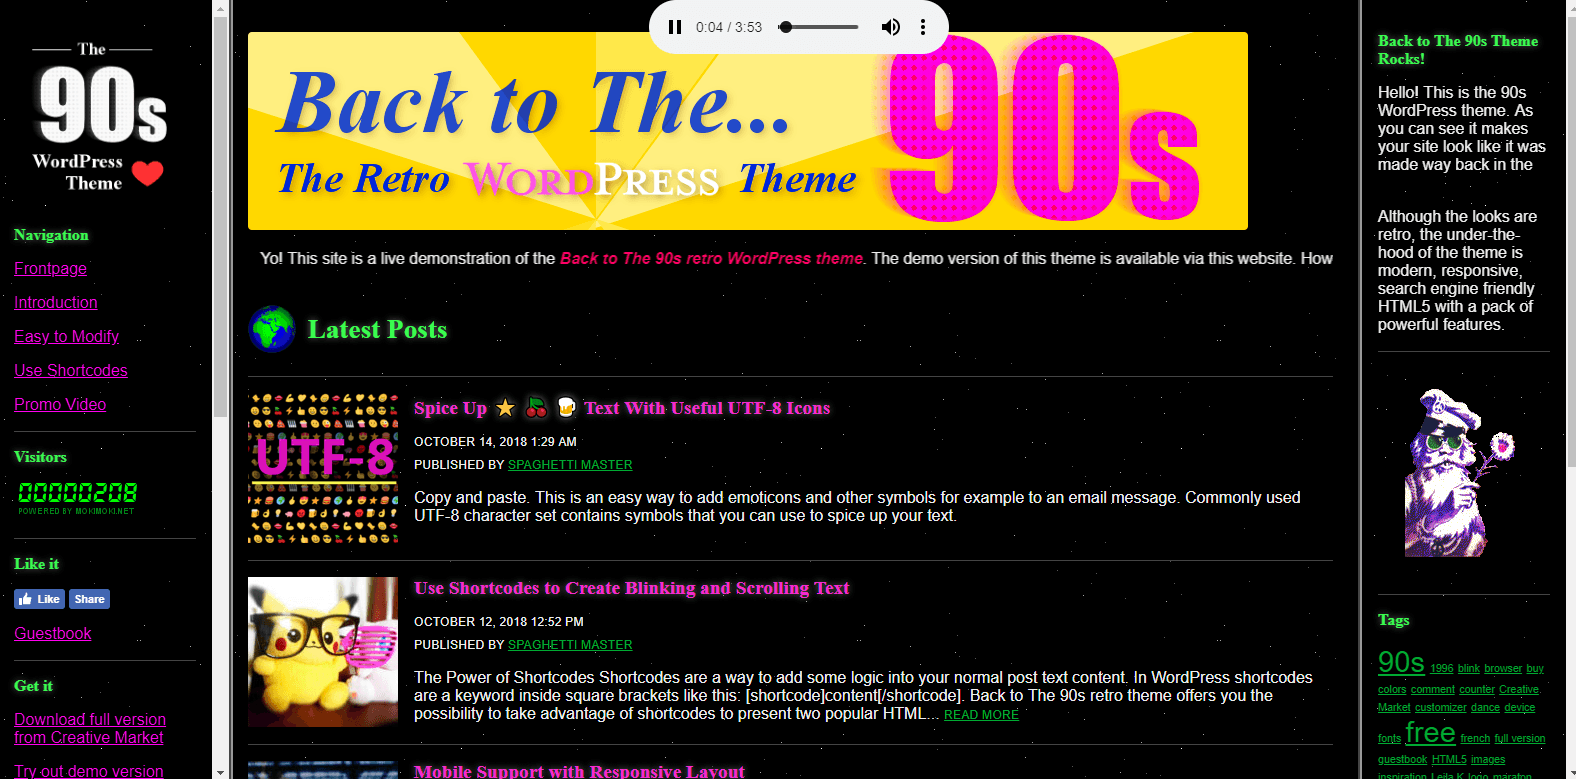 Back to the 90s theme review